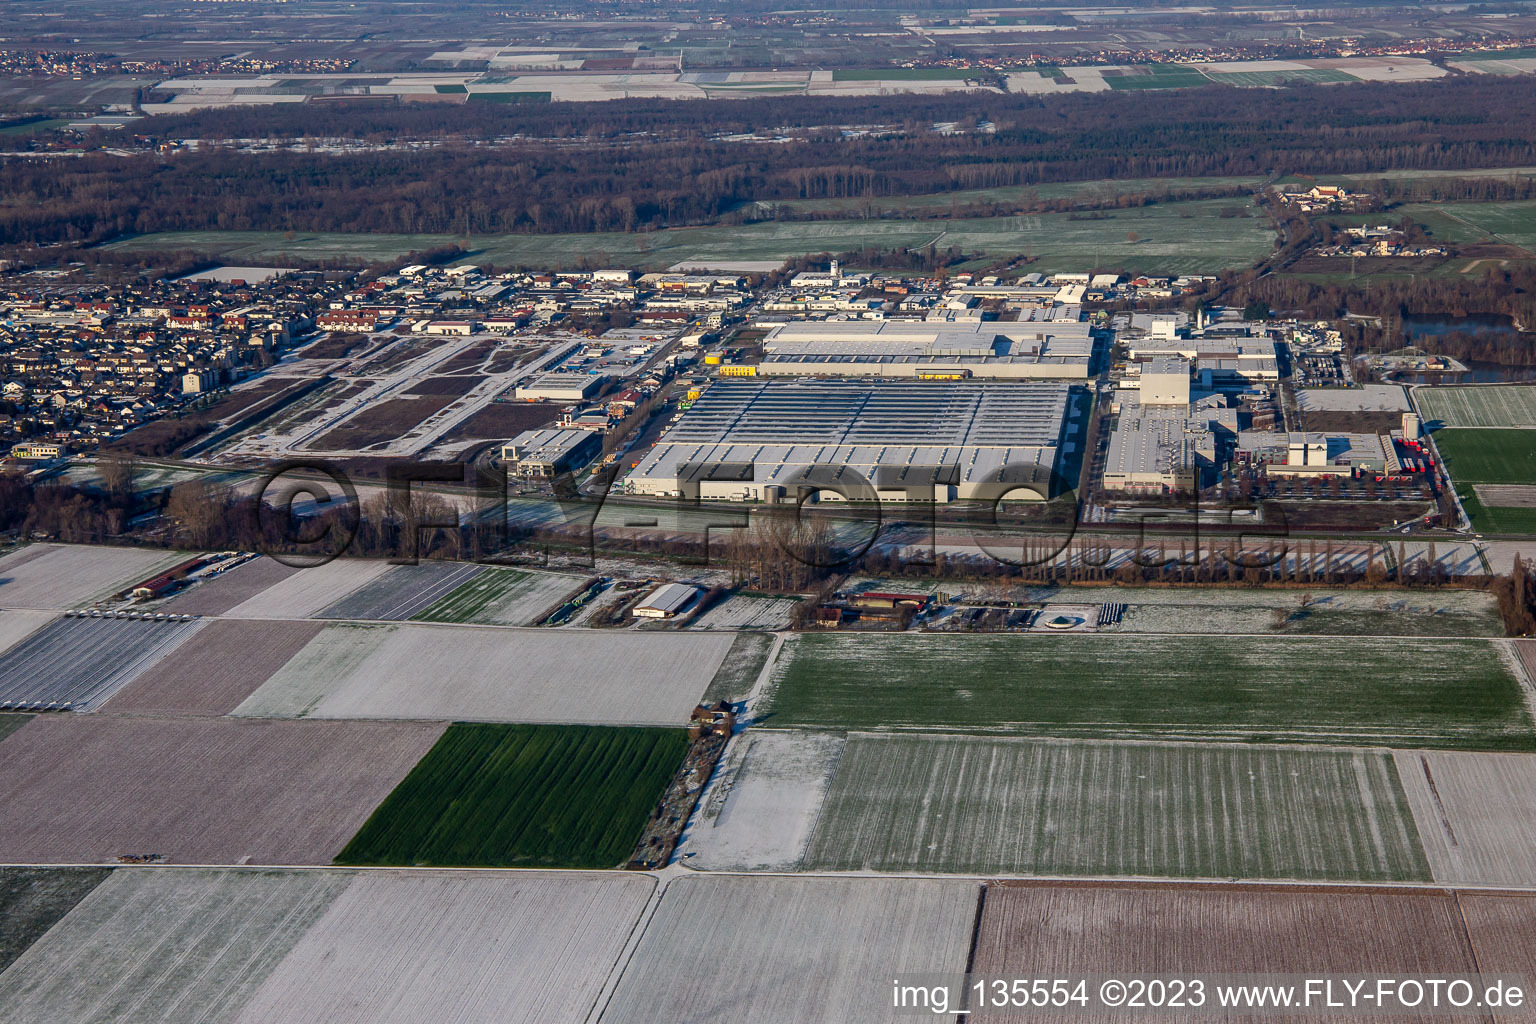 Interpark industrial area in winter with snow in Offenbach an der Queich in the state Rhineland-Palatinate, Germany